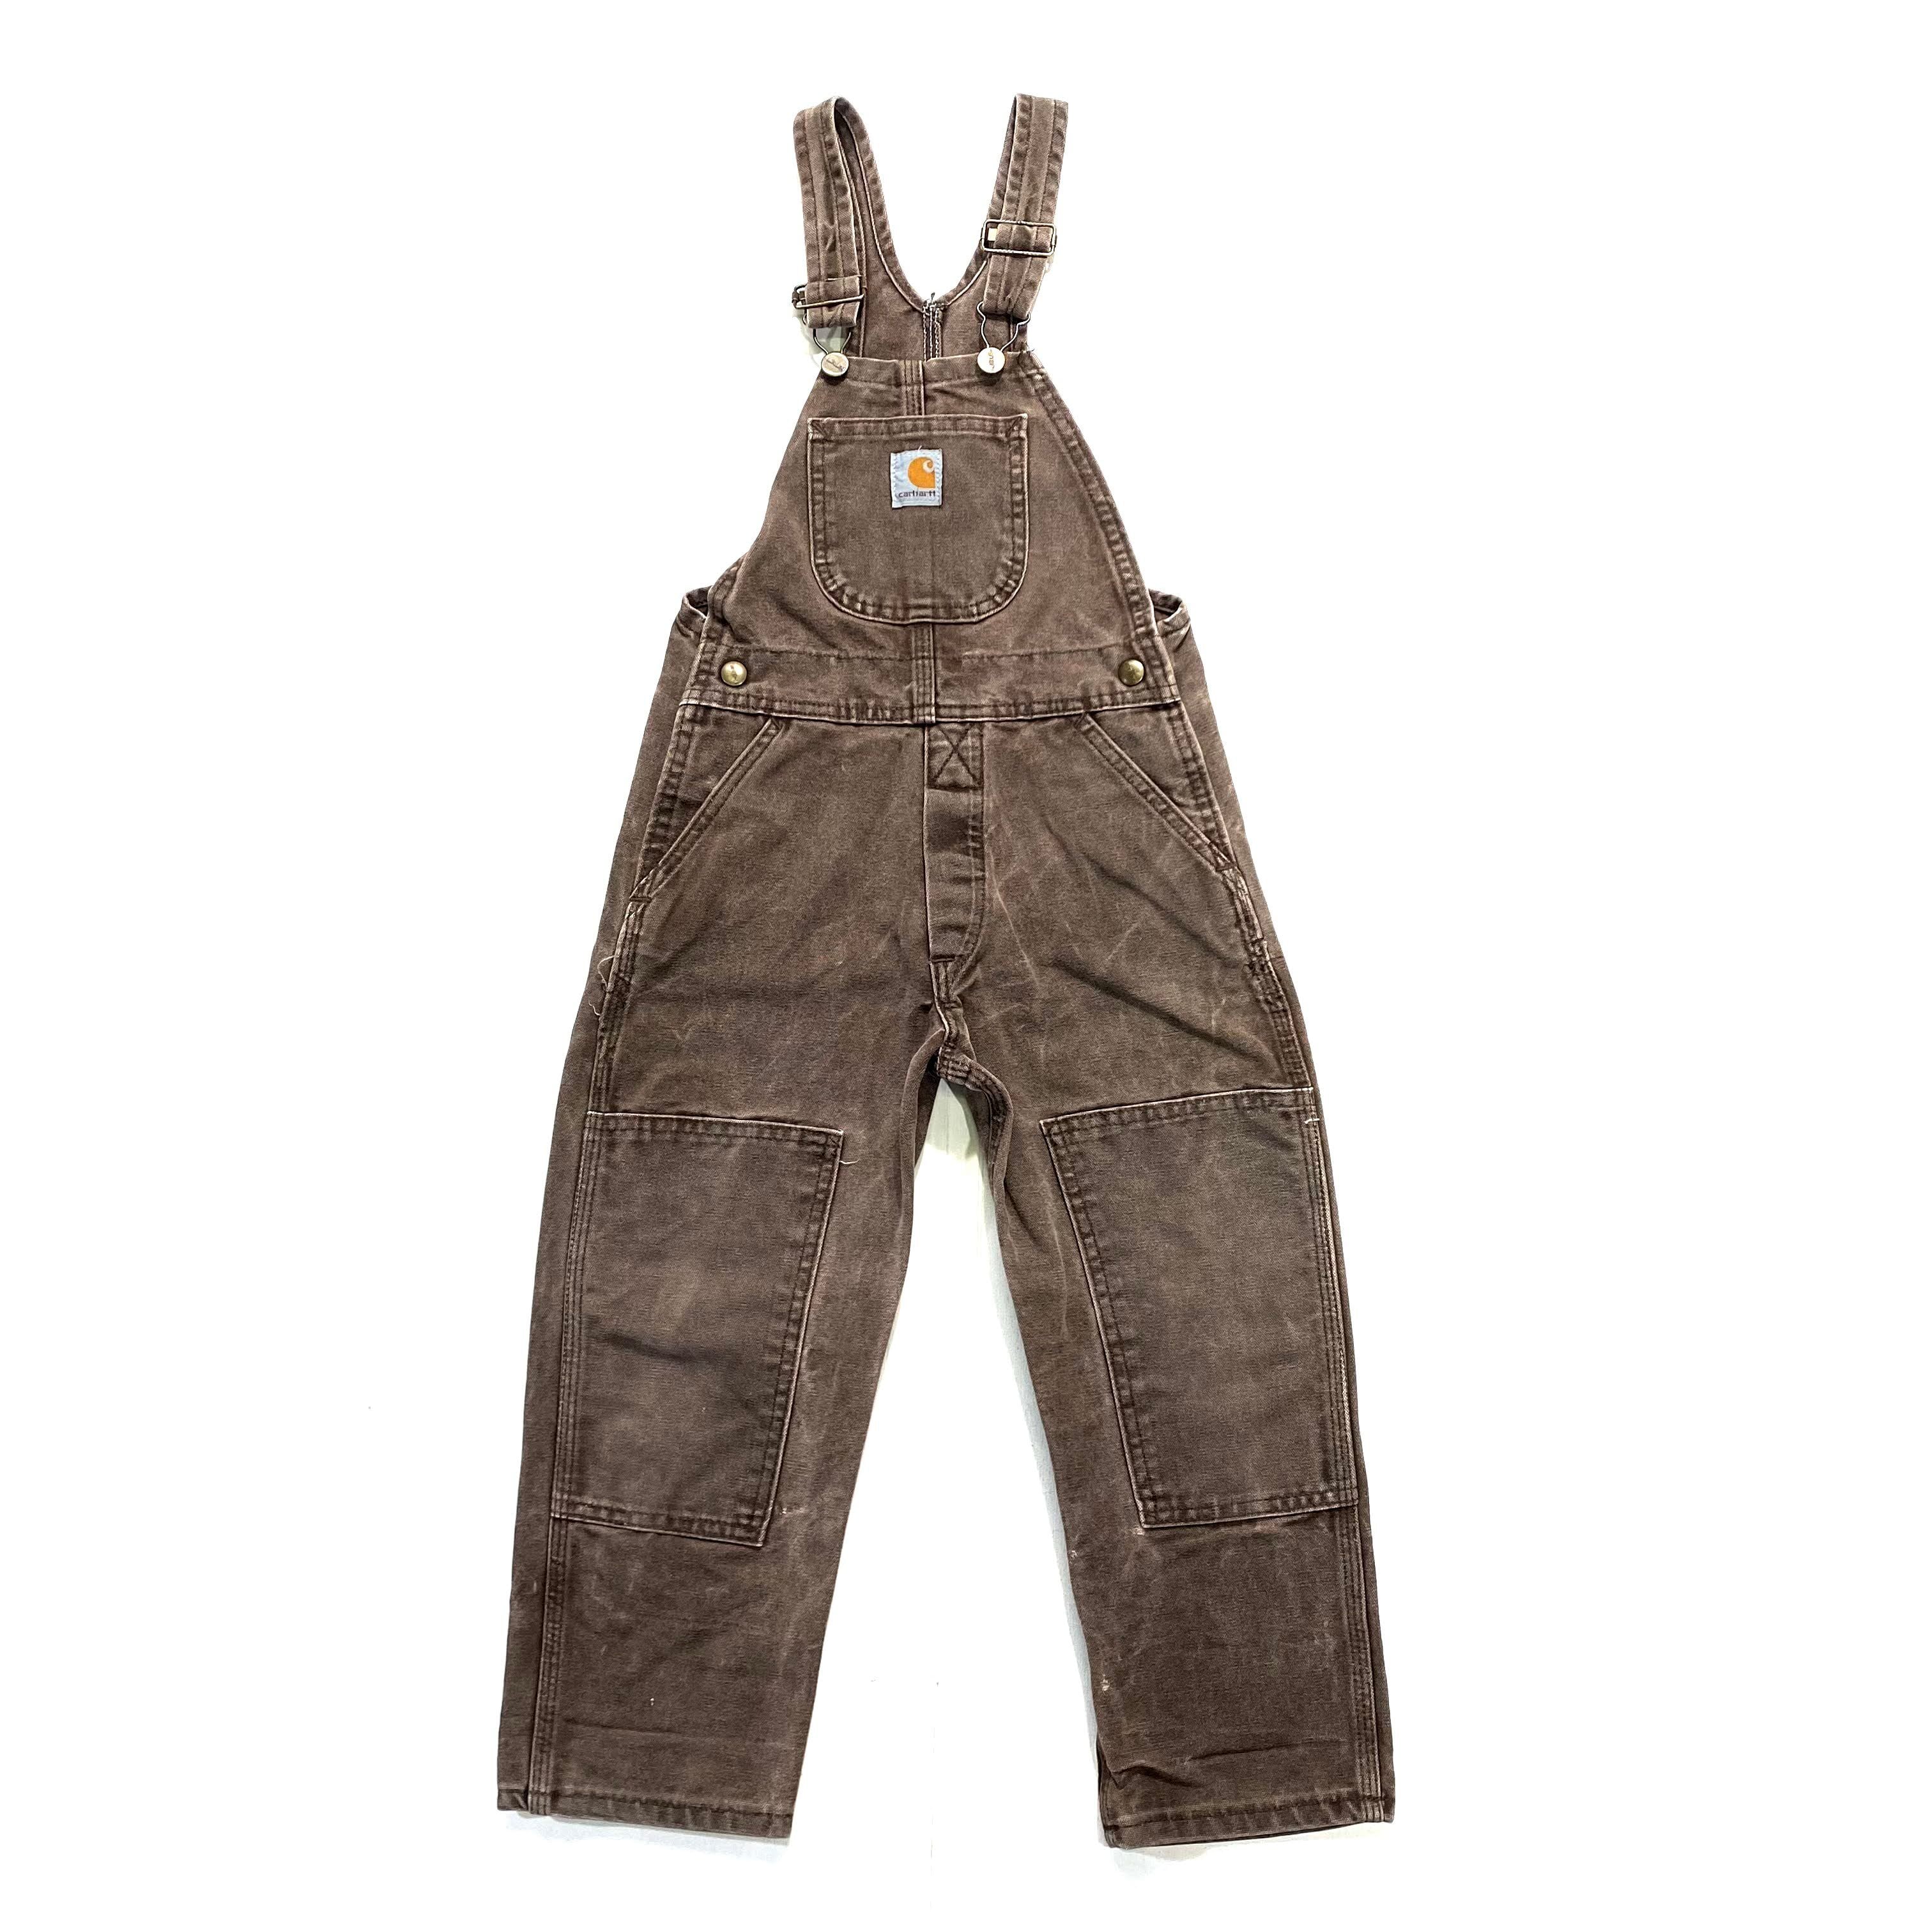 【kids】USA製　 カーハート　Carhartt ダブルニーオーバーオール　キッズ　5歳 計測値120?相当　子供服　キッズ　ボーイズ　 子供服  古着【ALL15】 | cave 古着屋【公式】古着通販サイト